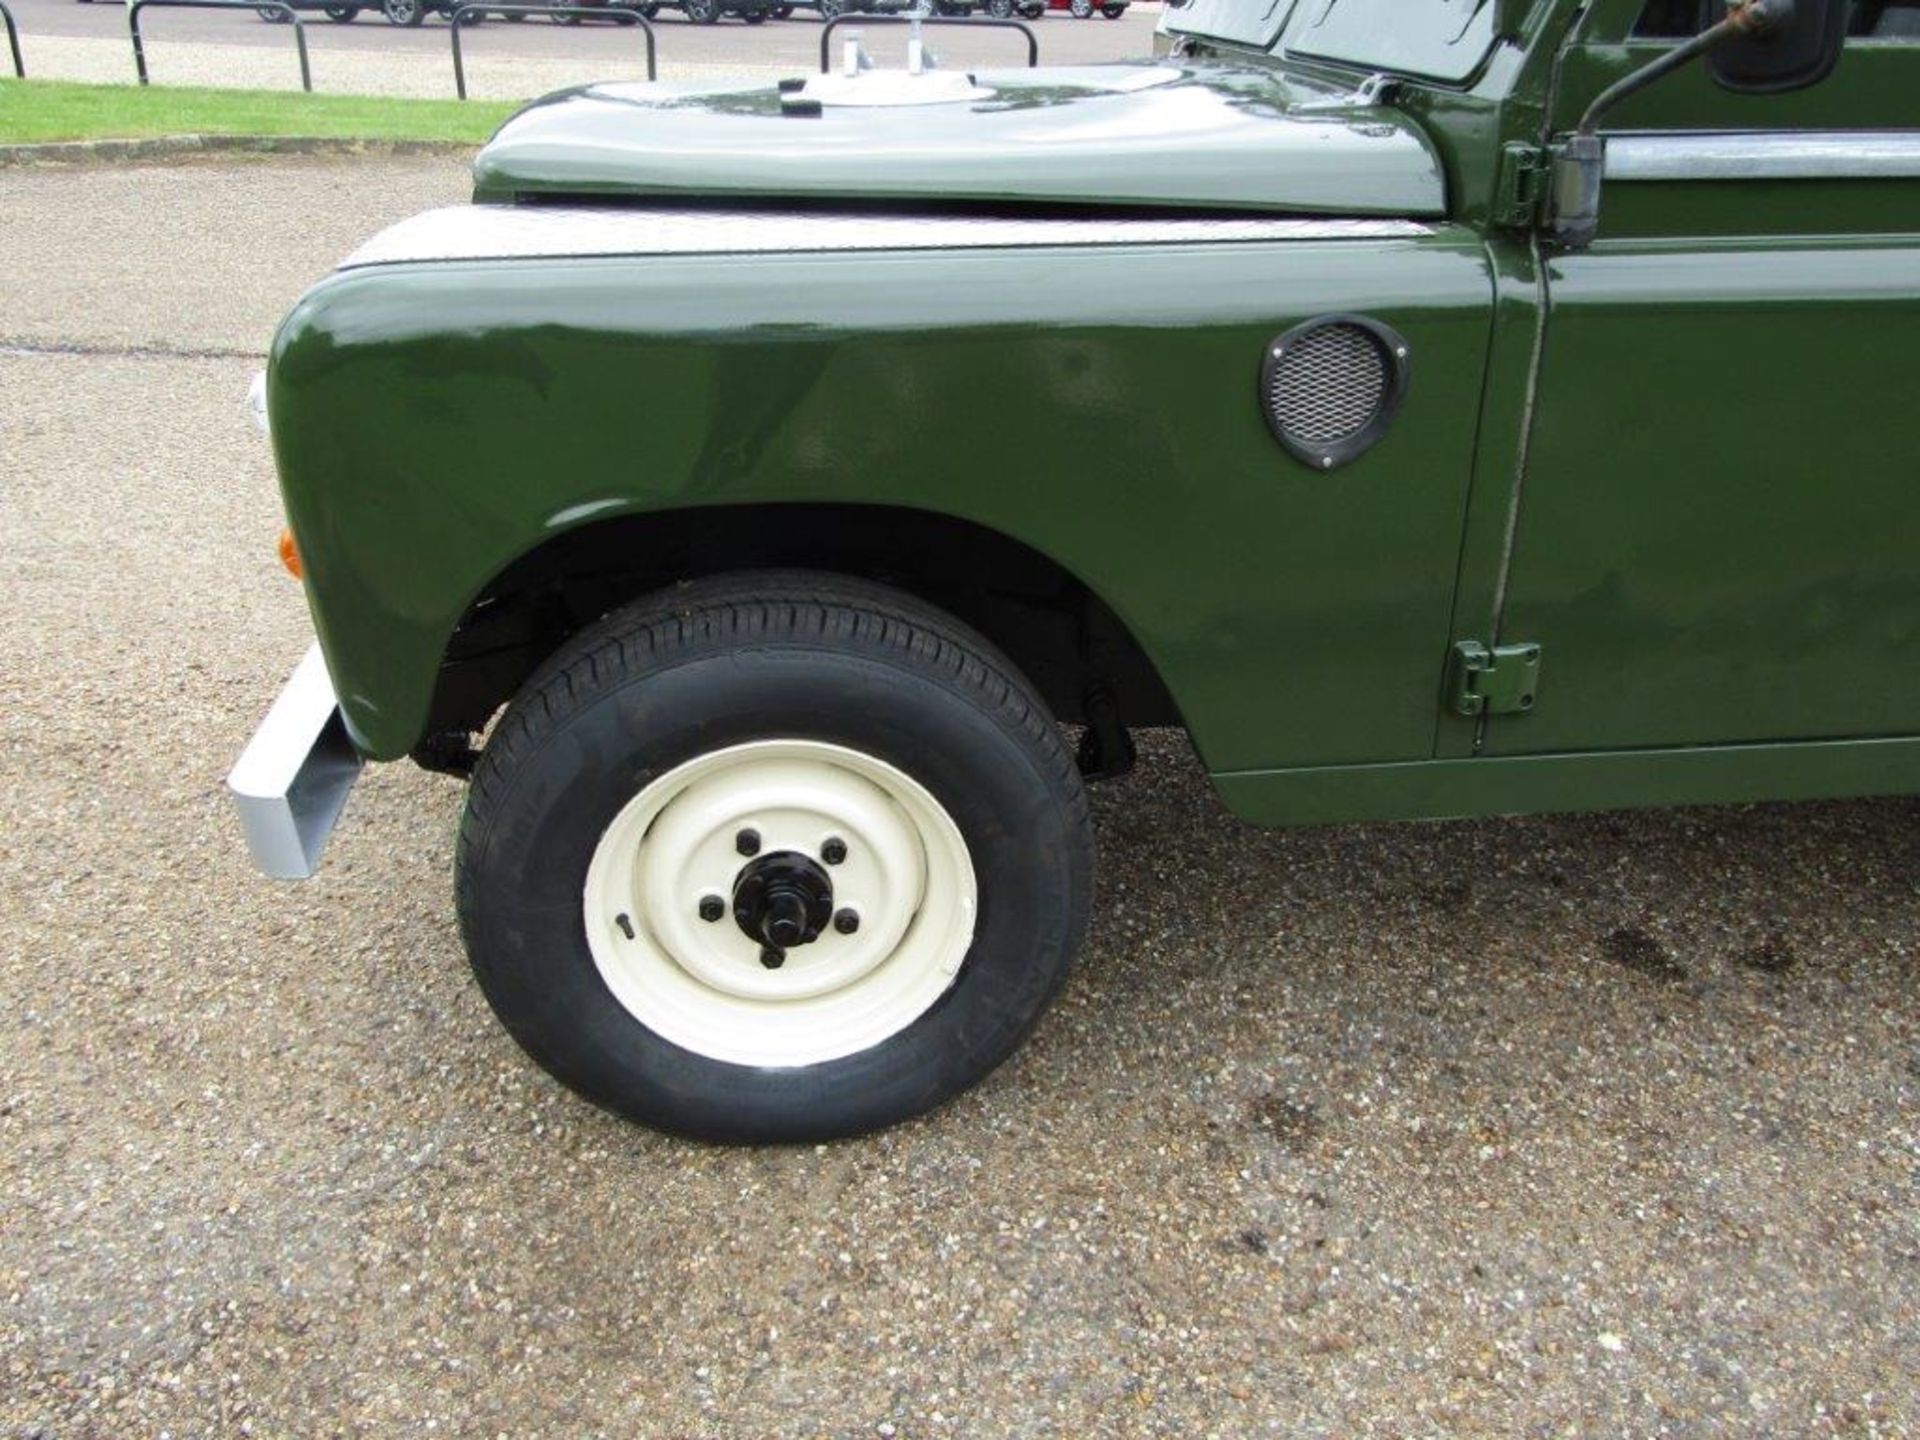 1980 Land Rover Series III - Image 4 of 25